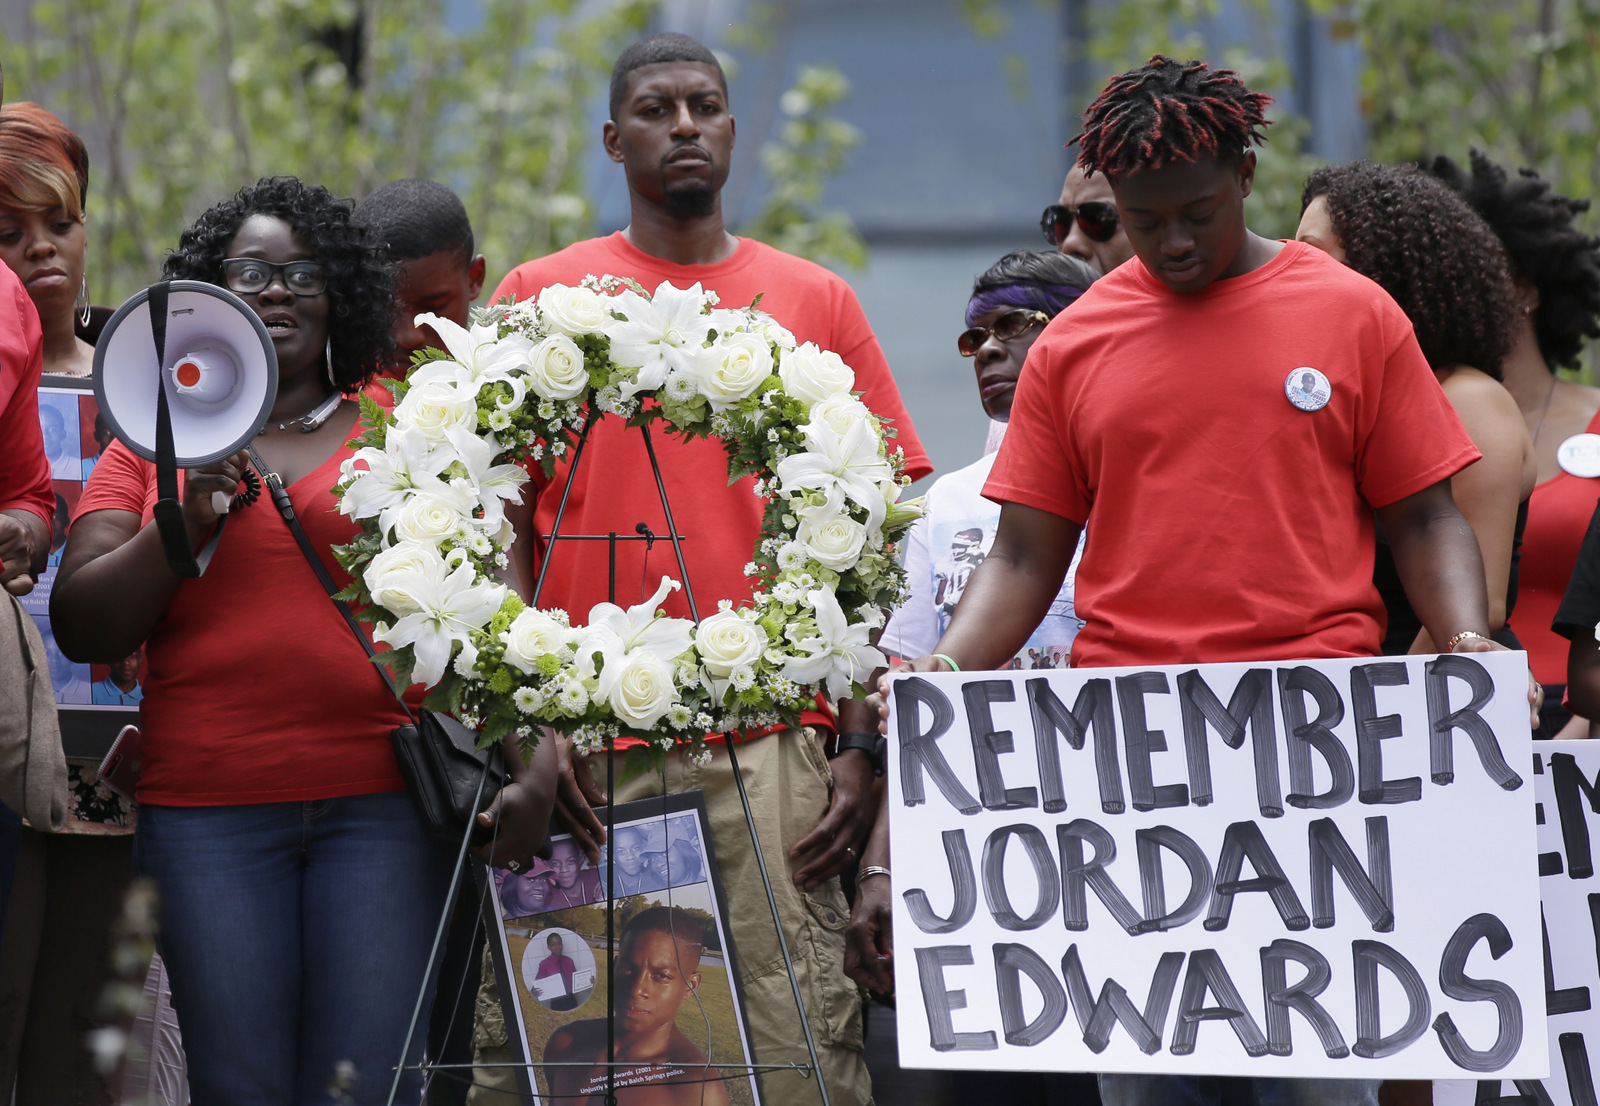 Slain teen Jordan Edwards' mother Charmaine Edwards, left, speaks to supporters with son Vidal Allen, right, and husband Odell Edwards during a protest outside the court house in Dallas.(AP/LM Otero)